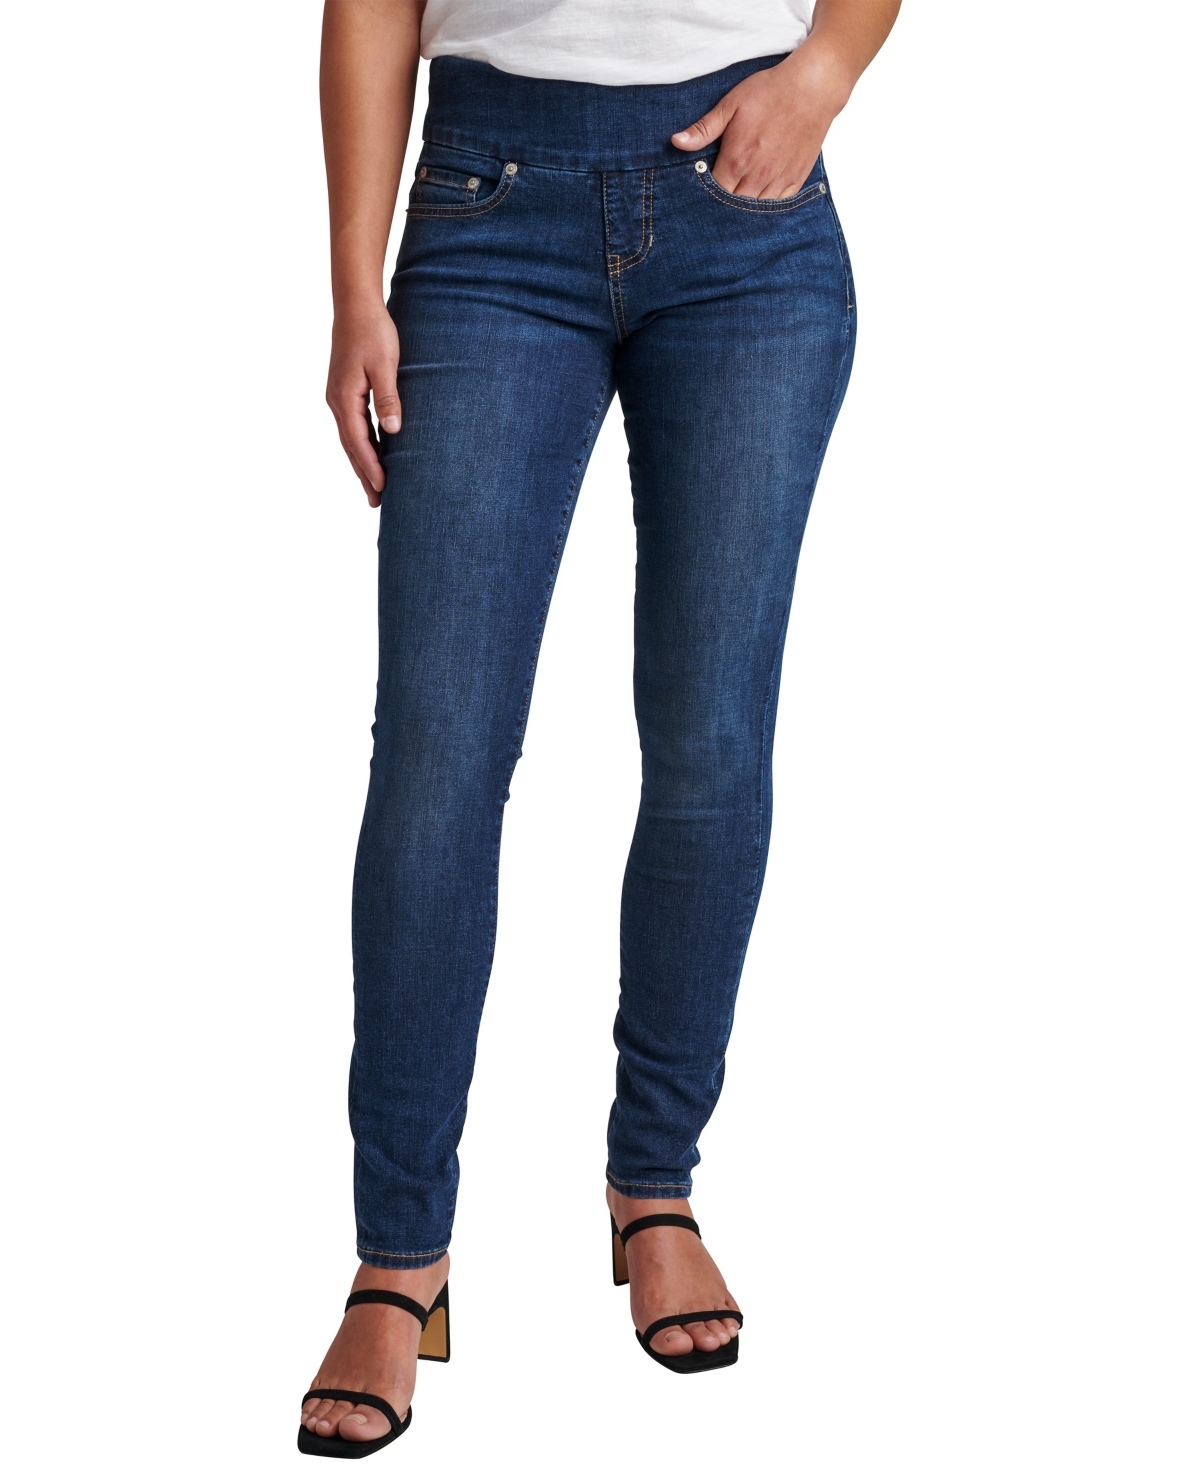 Jeans Women's Nora Mid Rise Skinny Pull-On Jeans - Anchor Blue